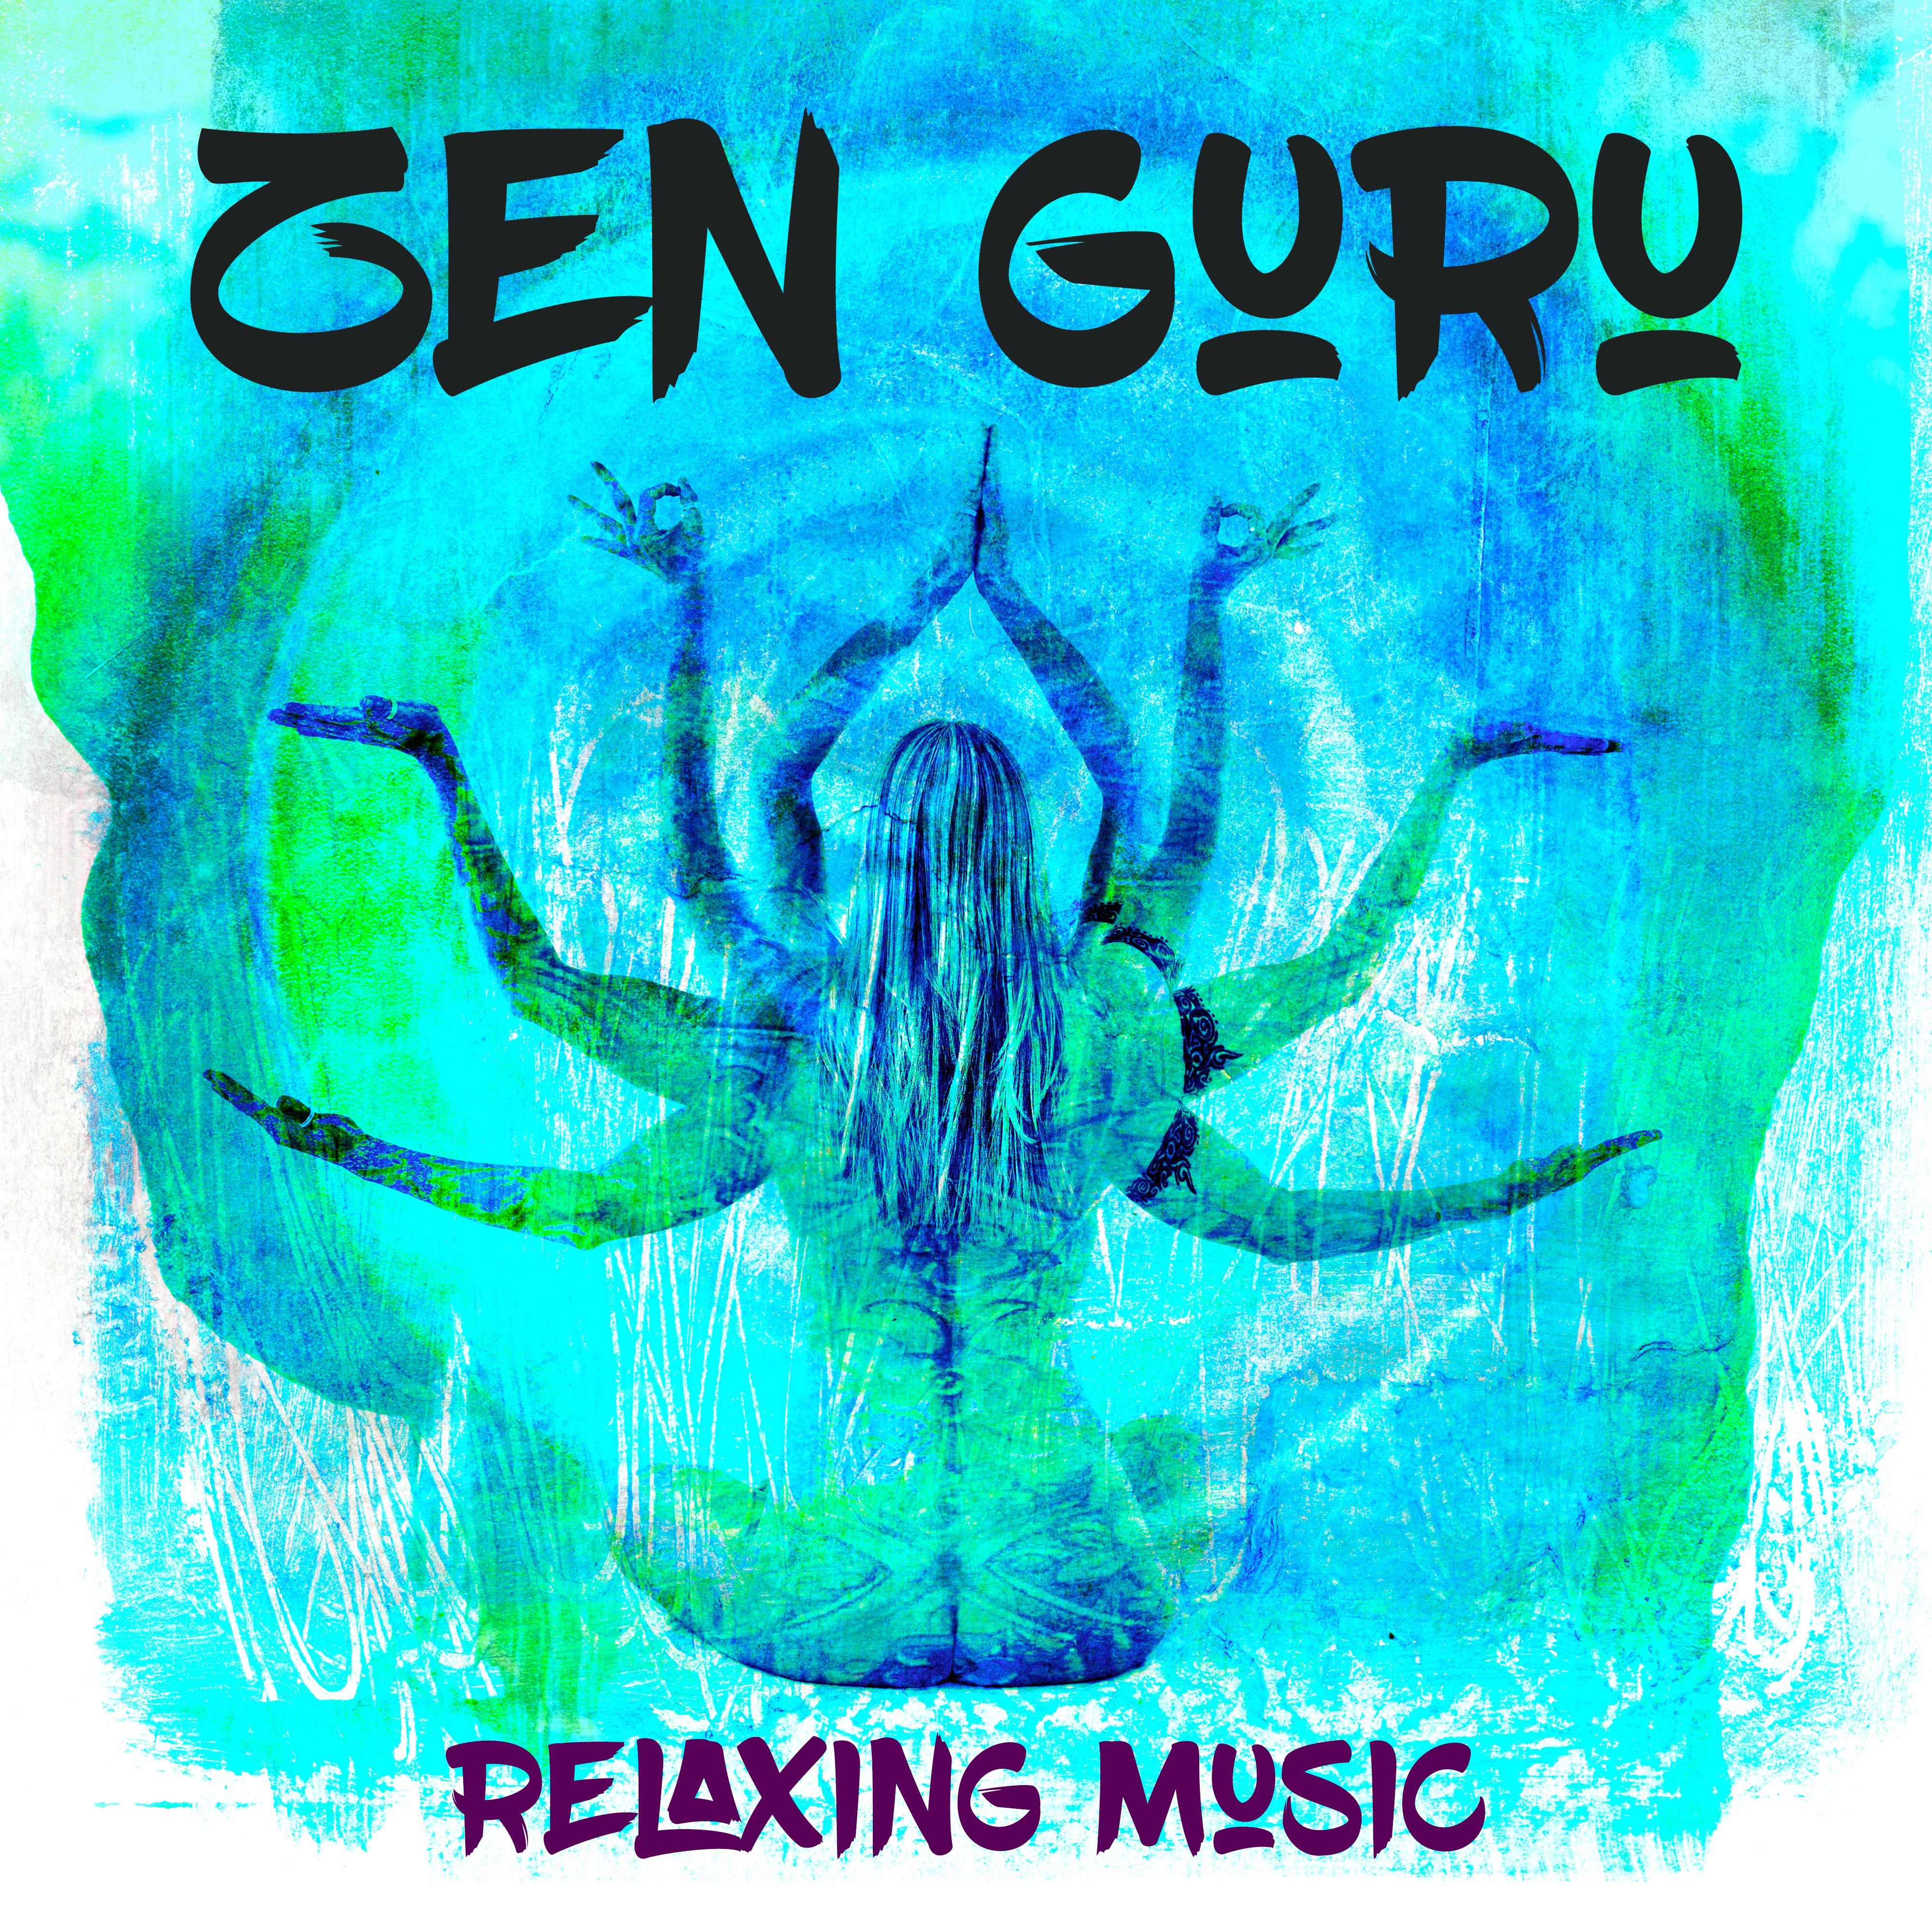 Zen Guru - Relaxing Music to find Peace and Harmony in your Life